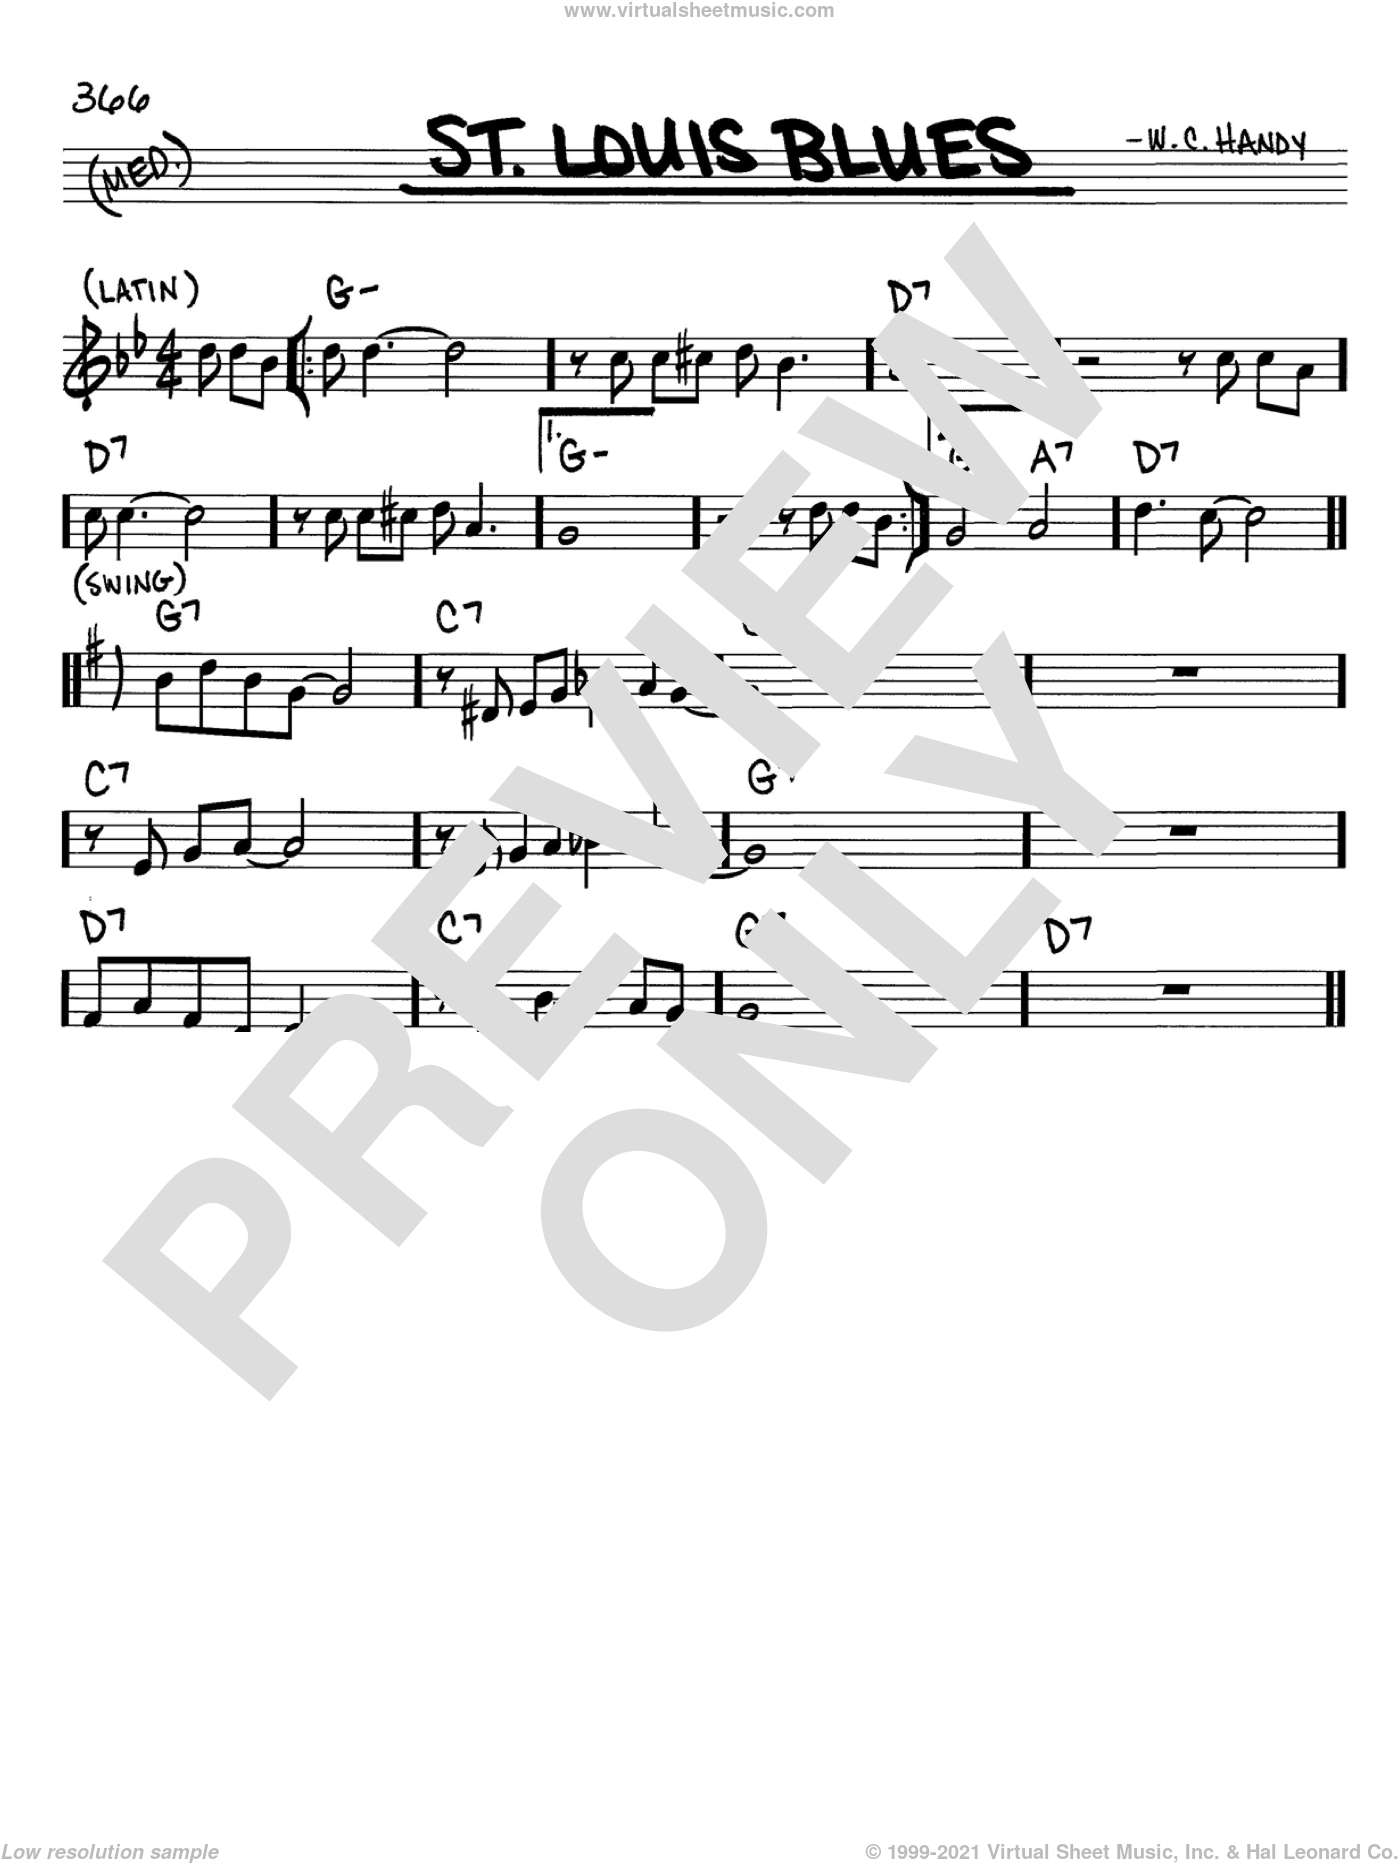 Handy - St. Louis Blues sheet music (real book - melody and chords) (in C)